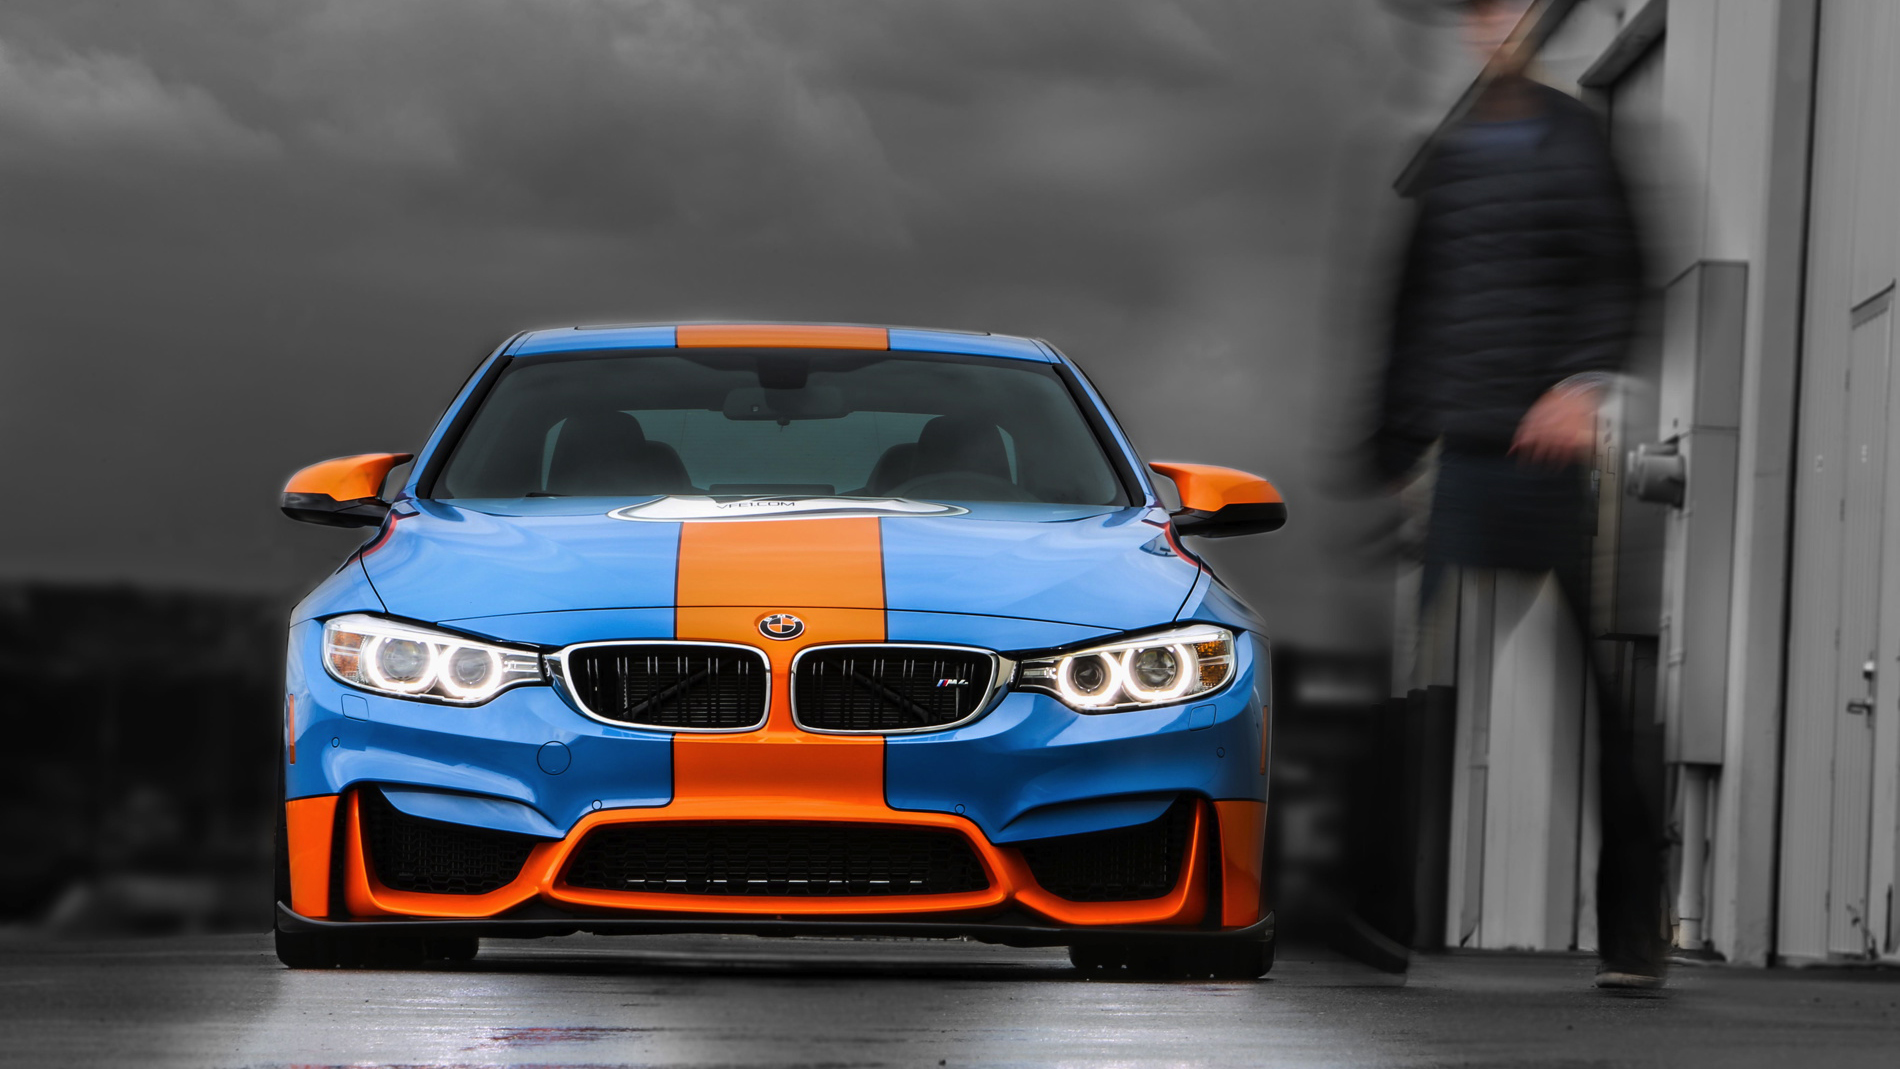 BMW M4 by HEX Tuning